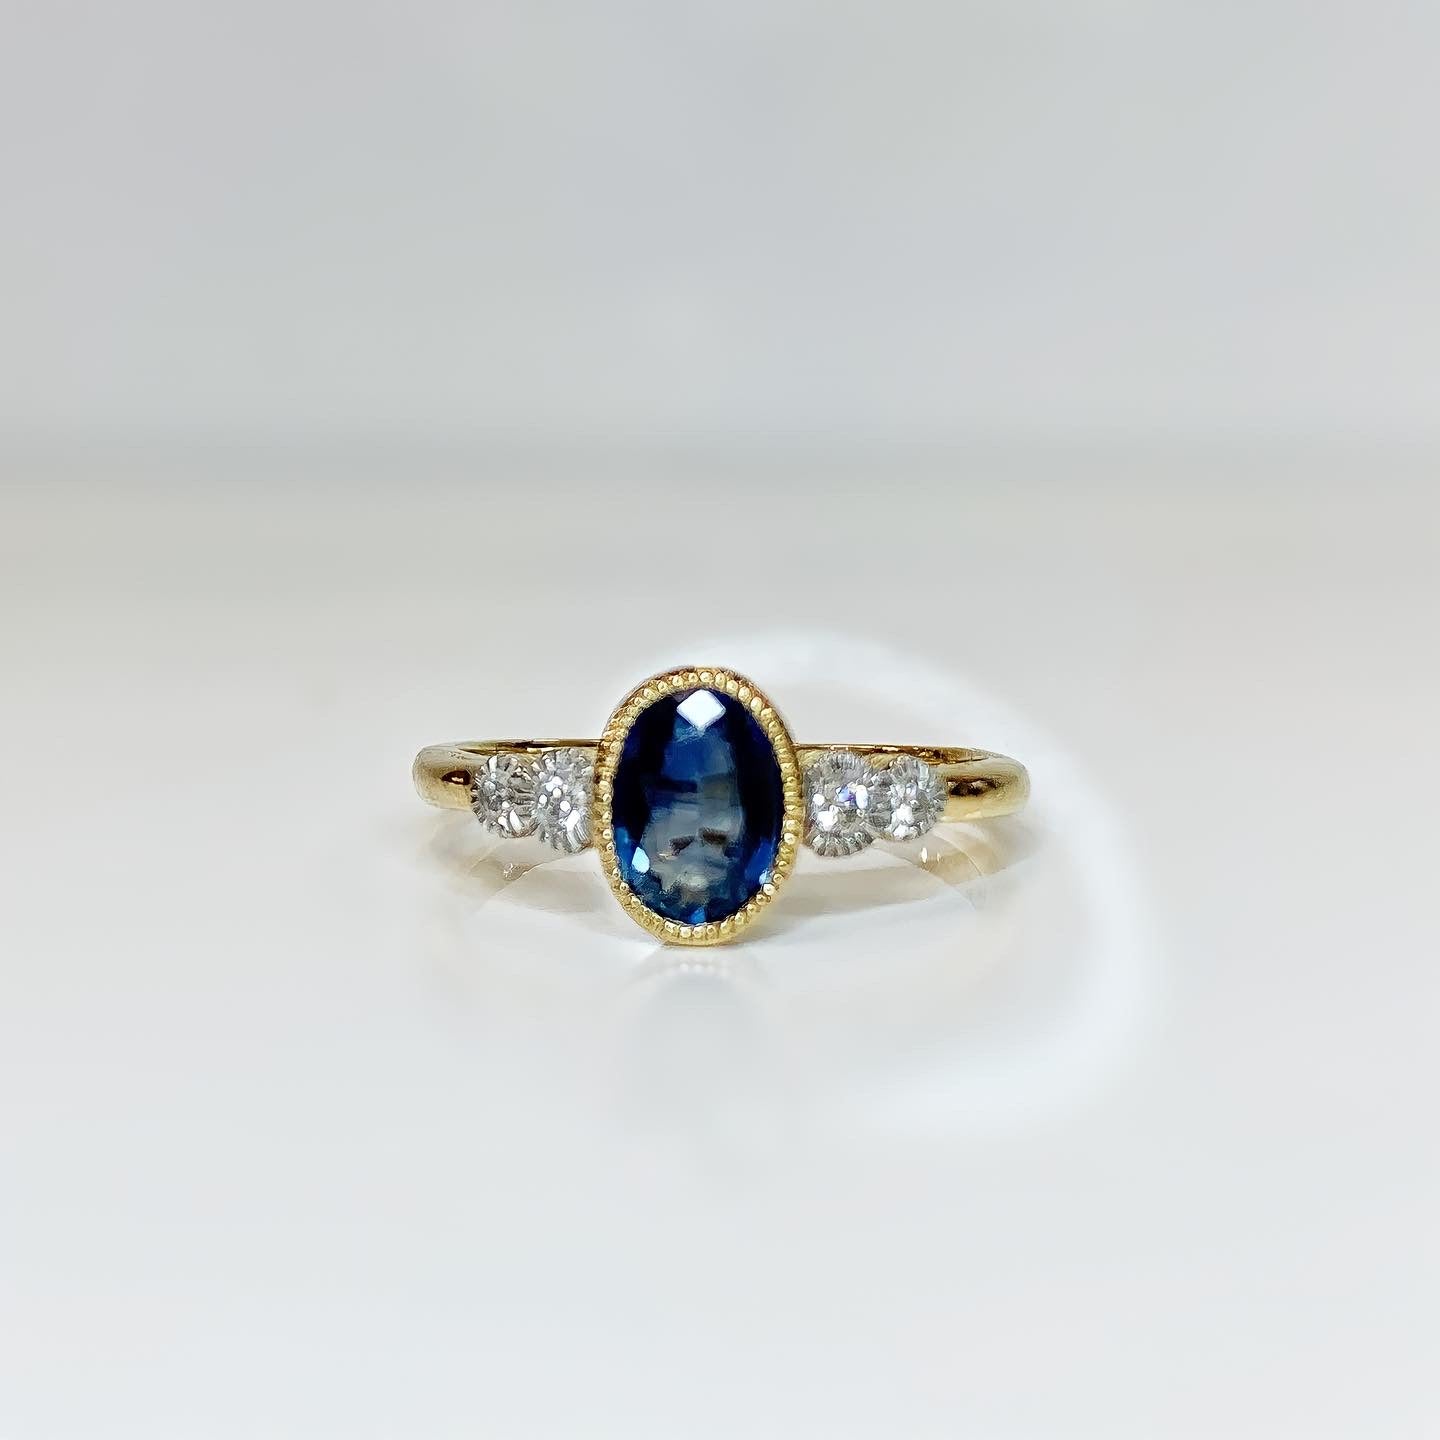 9ct Yellow Gold Oval Cut Sapphire and Diamond Engagement Ring - SIZE K 1/2